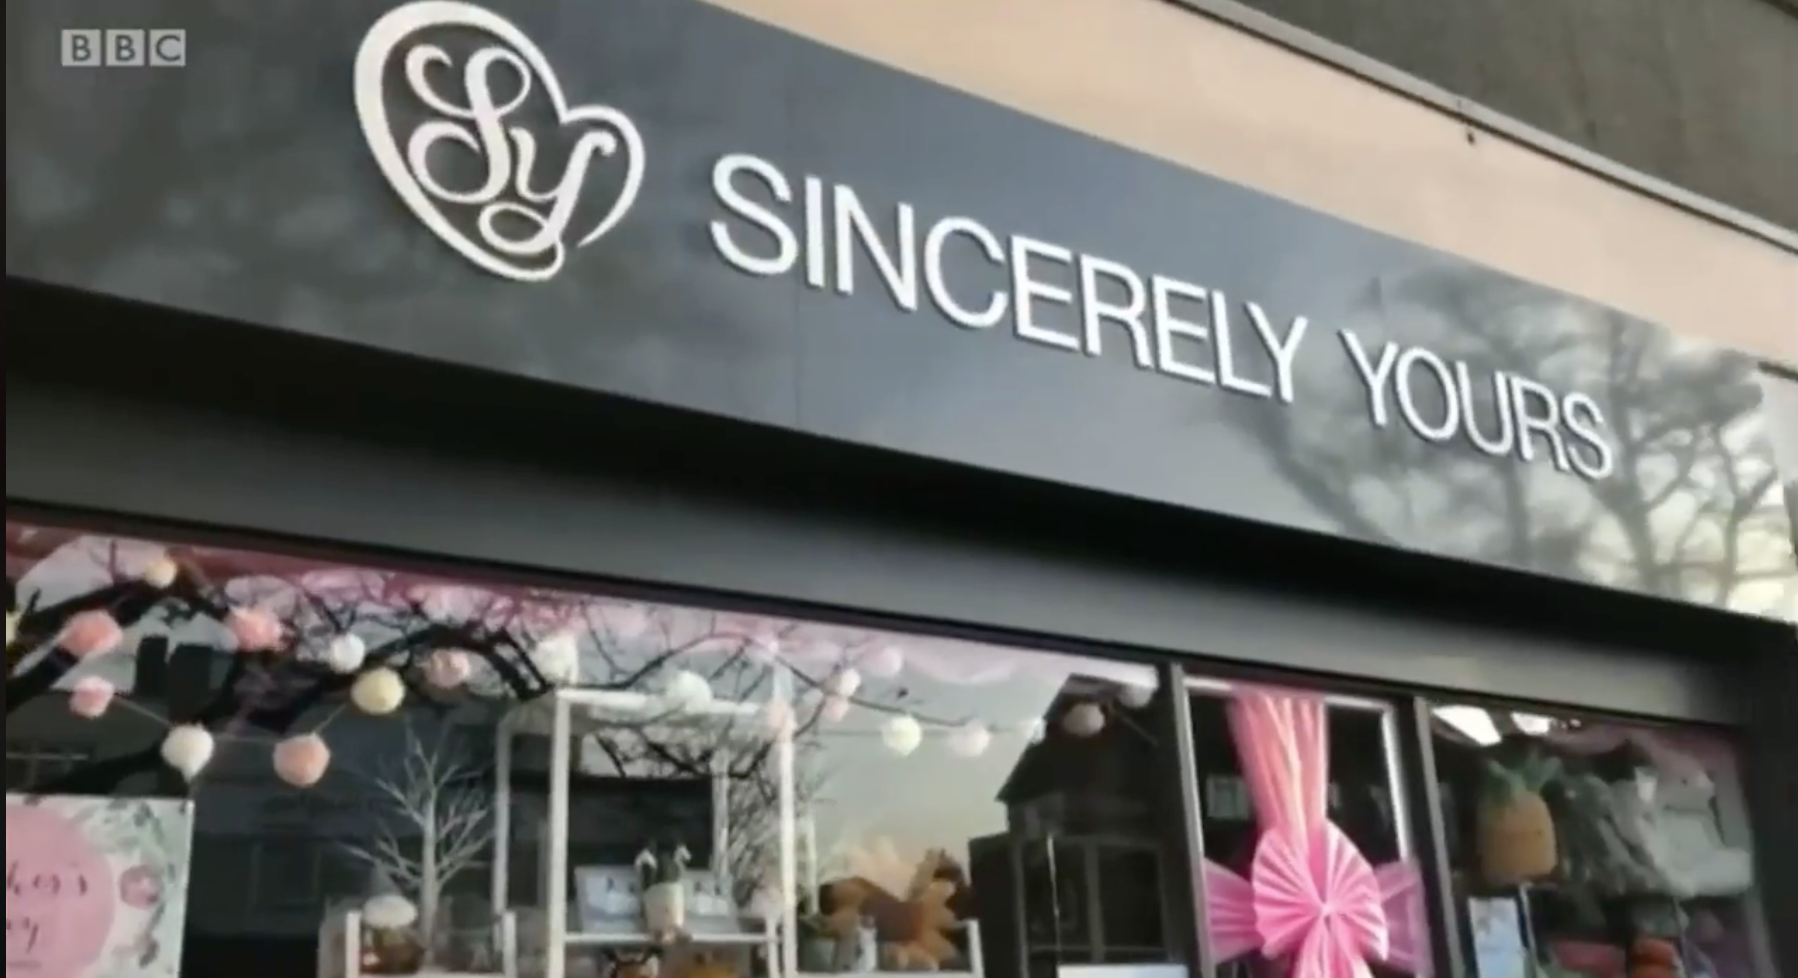 Above: The BBC News showed footage of the Sincerely Yours Shenfield store.